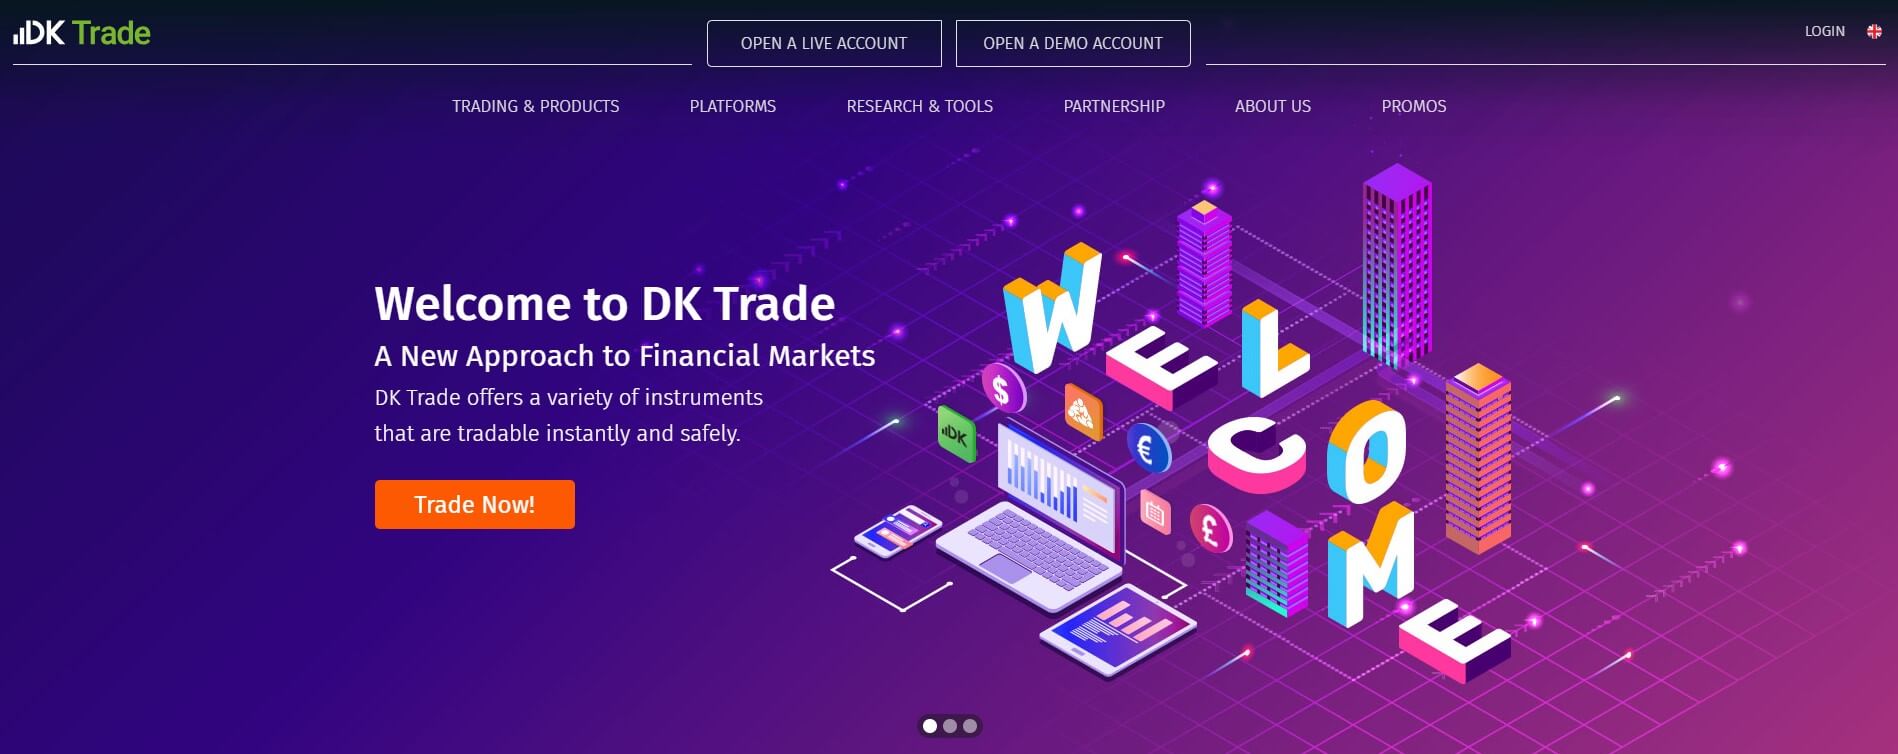 DK Trade Review | Forex Academy